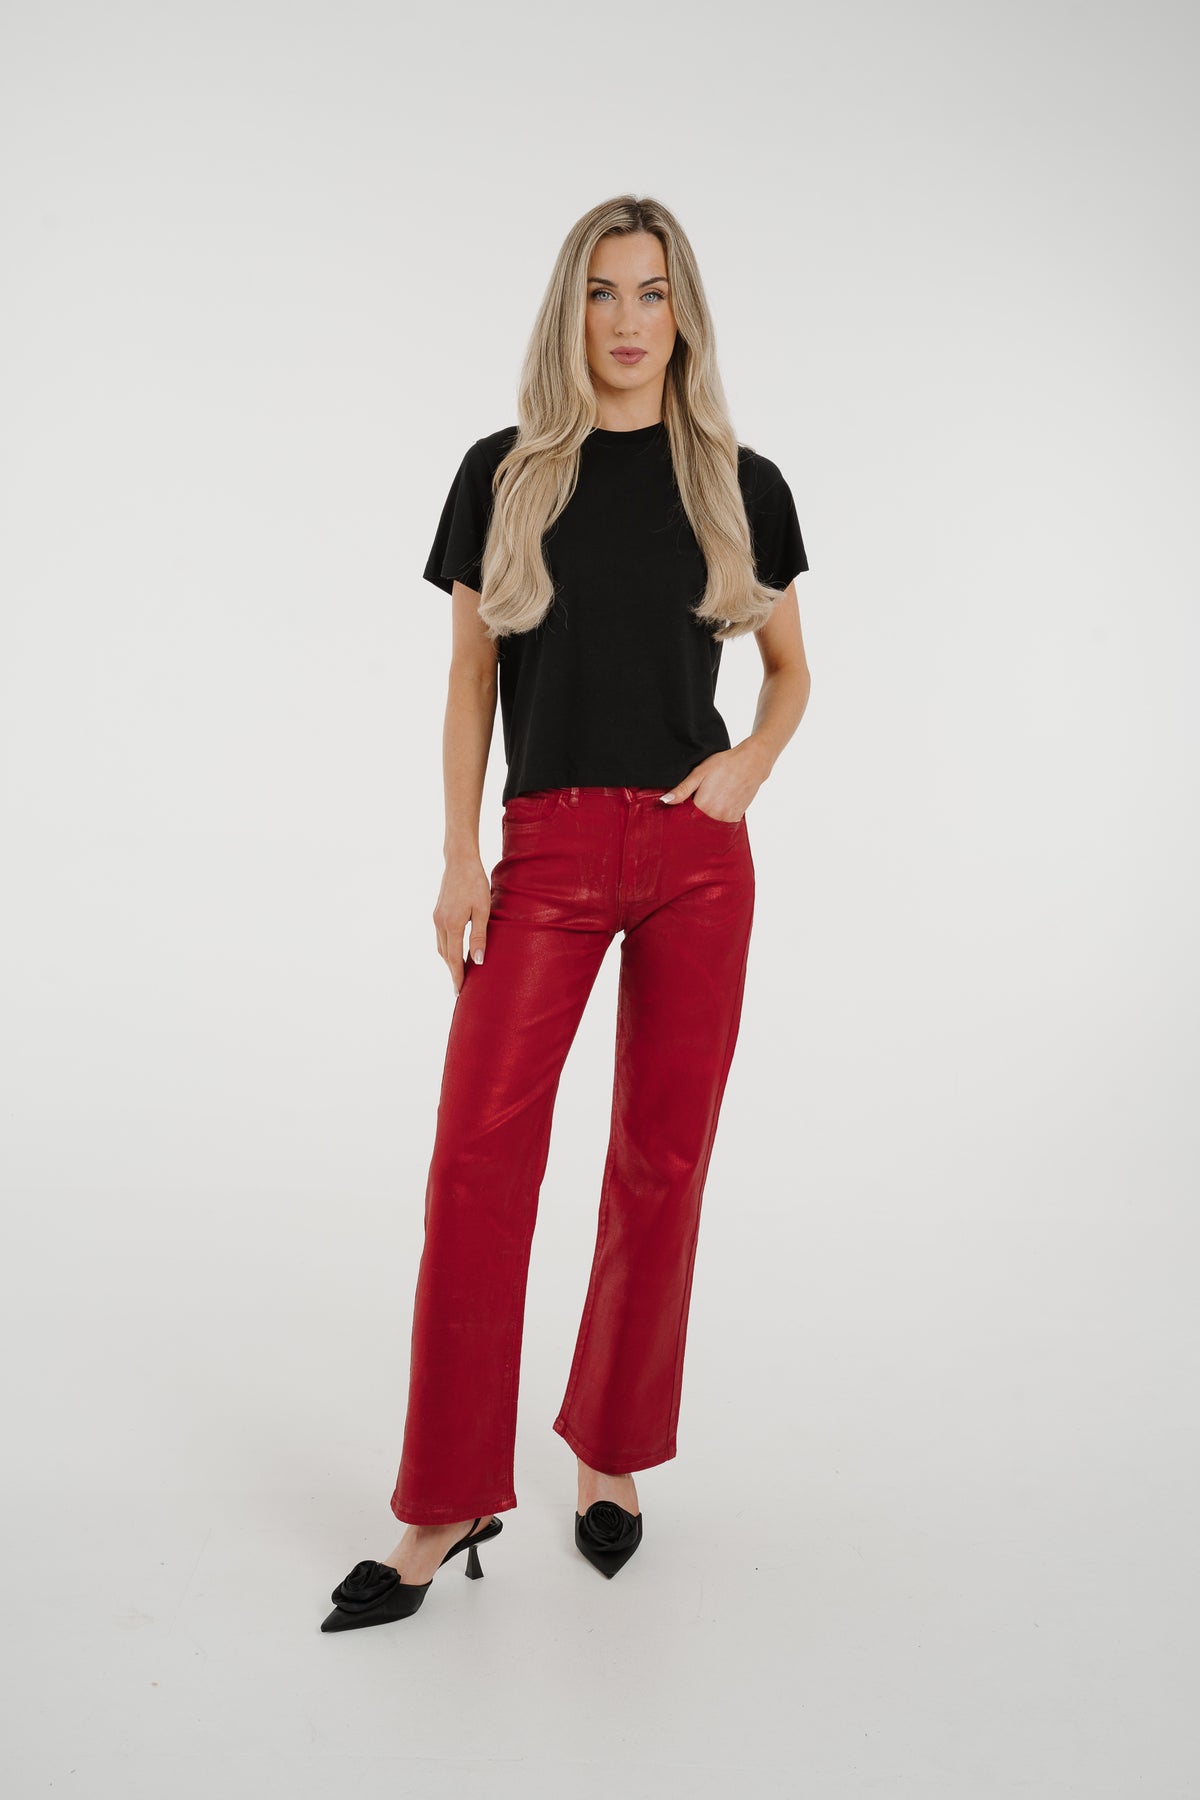 Quinn Metallic Jeans In Red